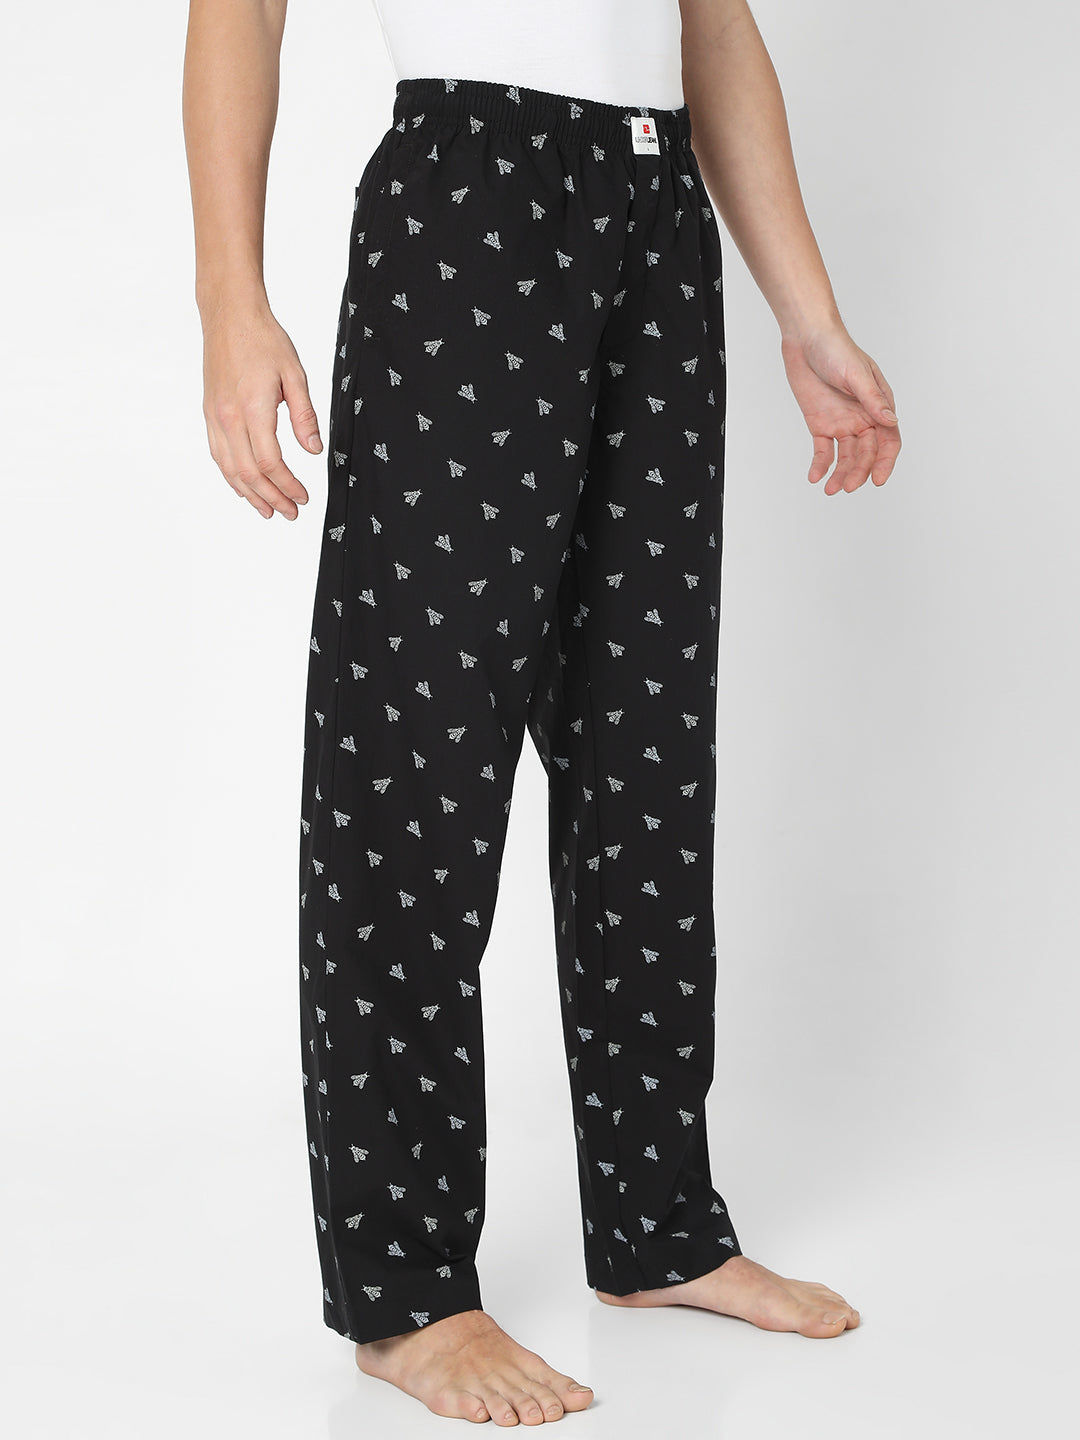 Jockey Womens Super Combed Cotton Pajama  Online Shopping site in India